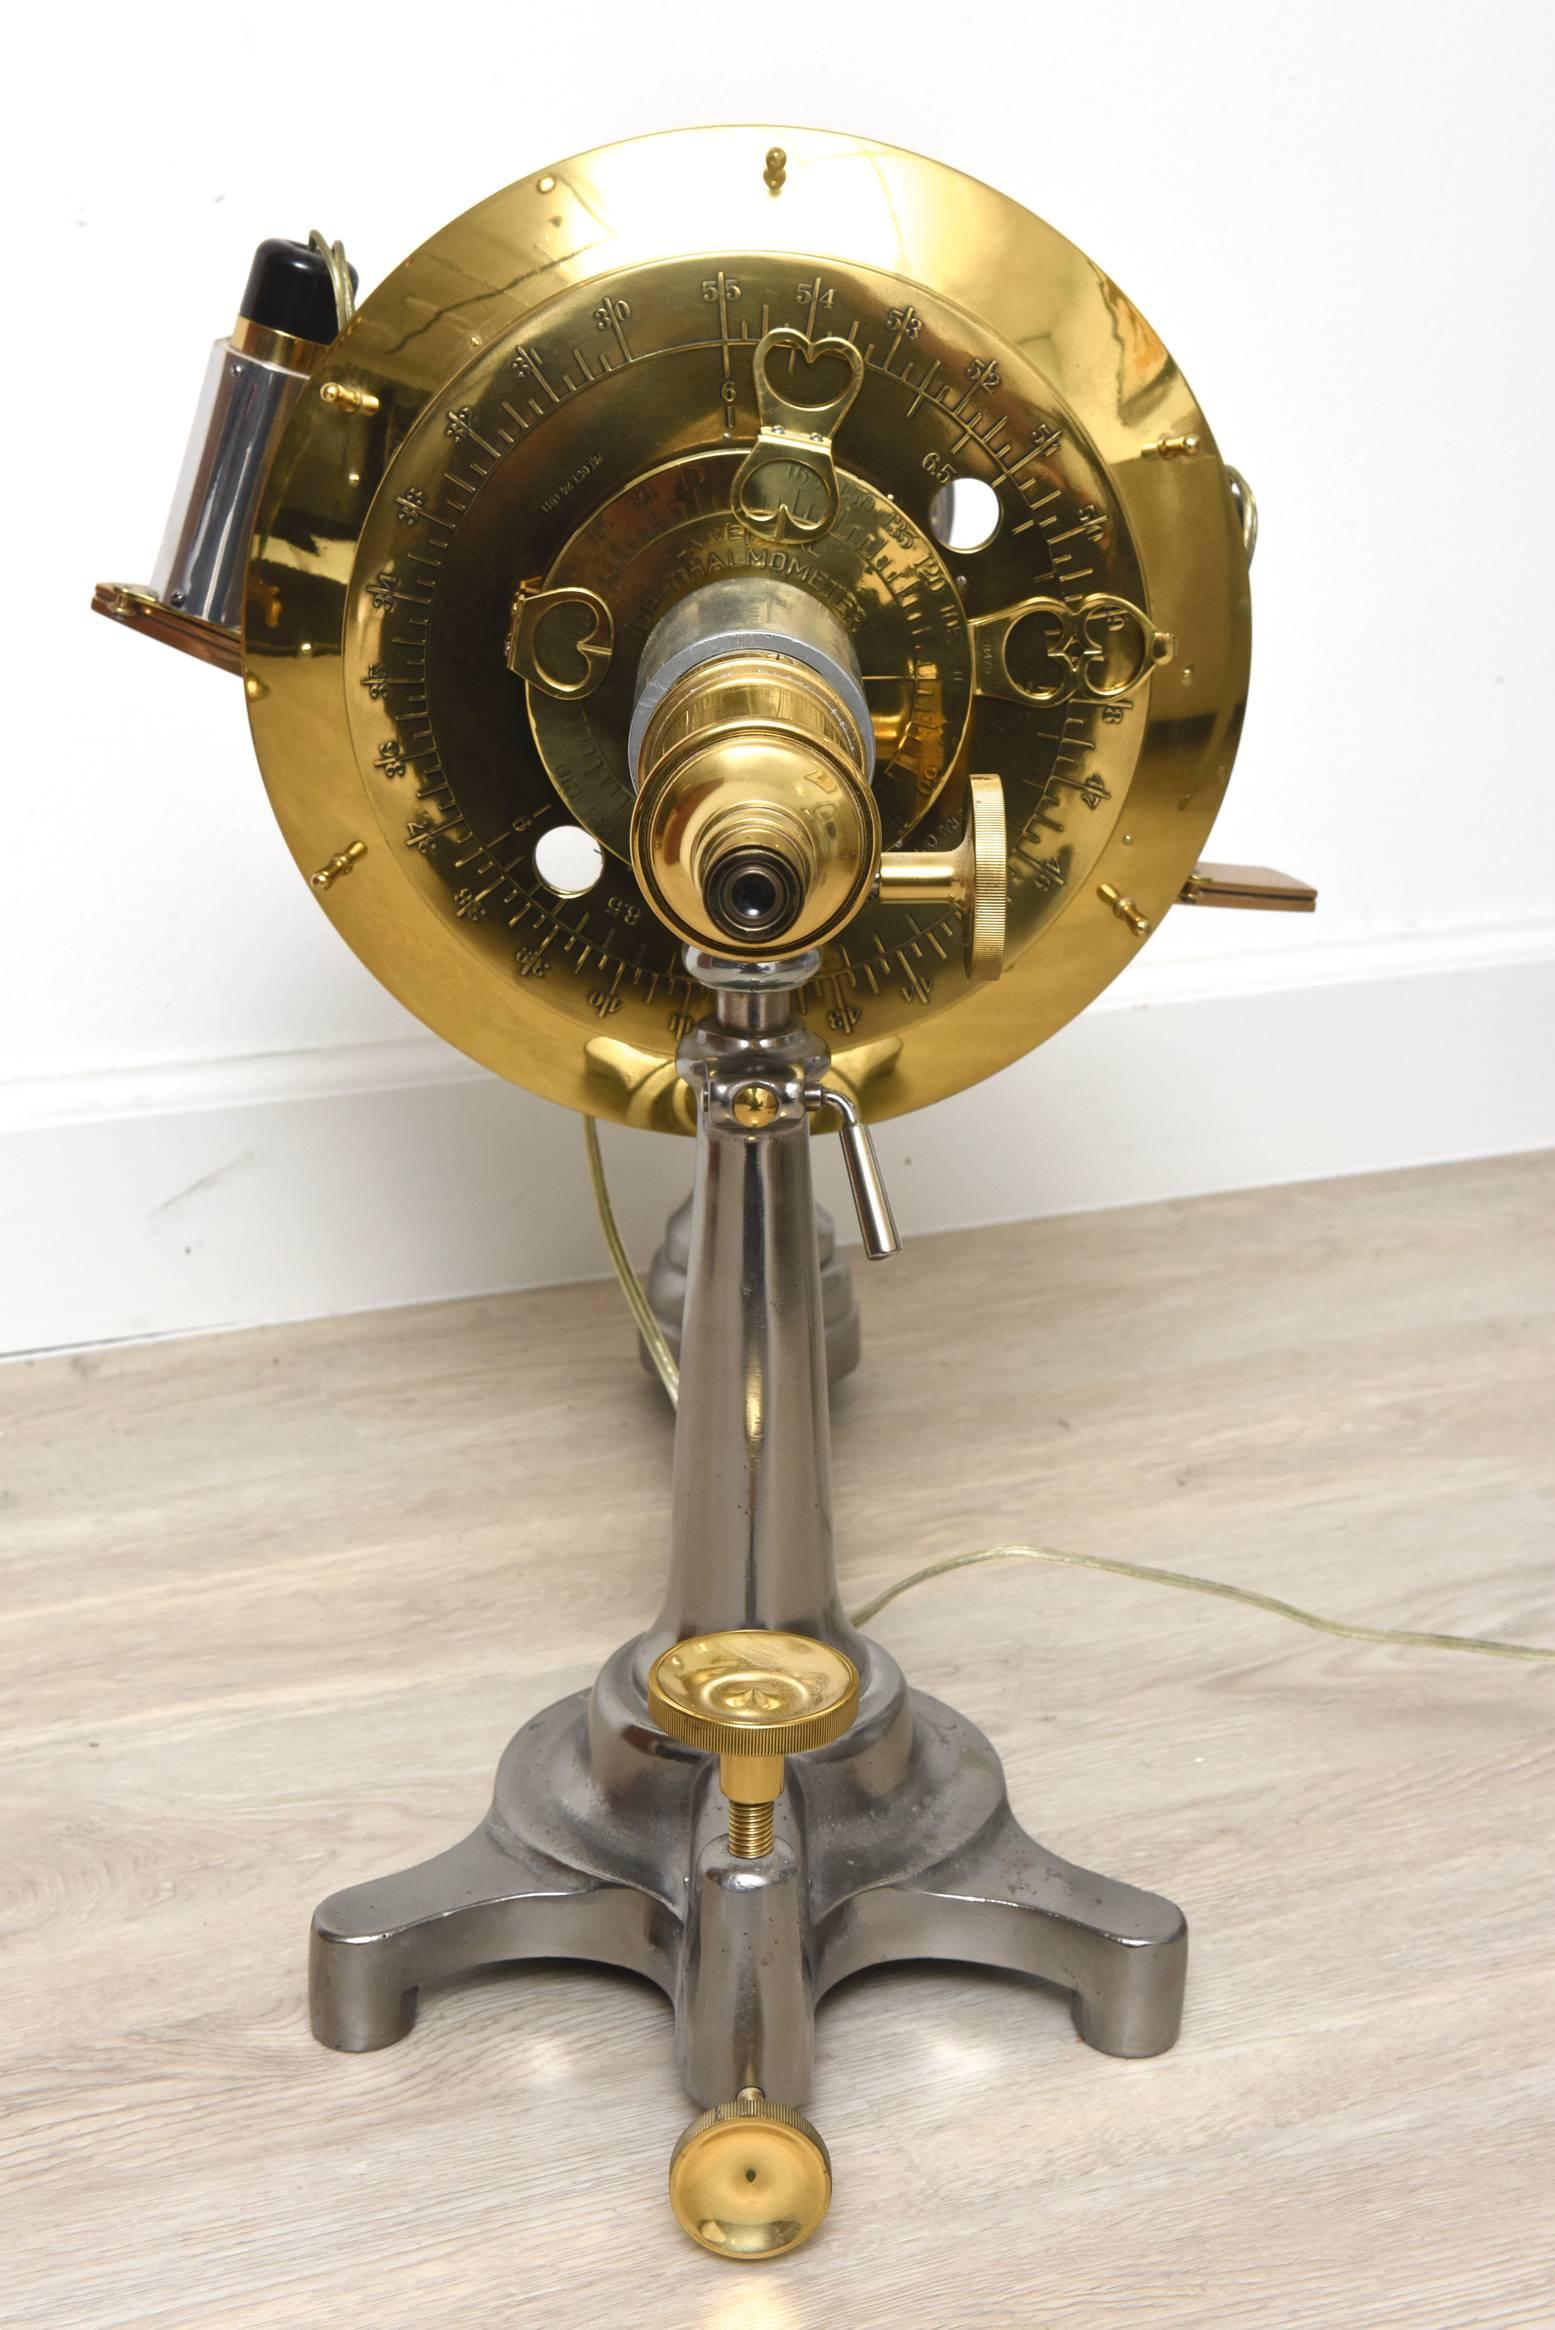 This antique universal ophthalmometer eye exam machine by General Optical Company was used by an eye doctor over 100 years ago for examining a person’s eyes. An ophthalmometer is an instrument to measure the size of a reflected image on the convex